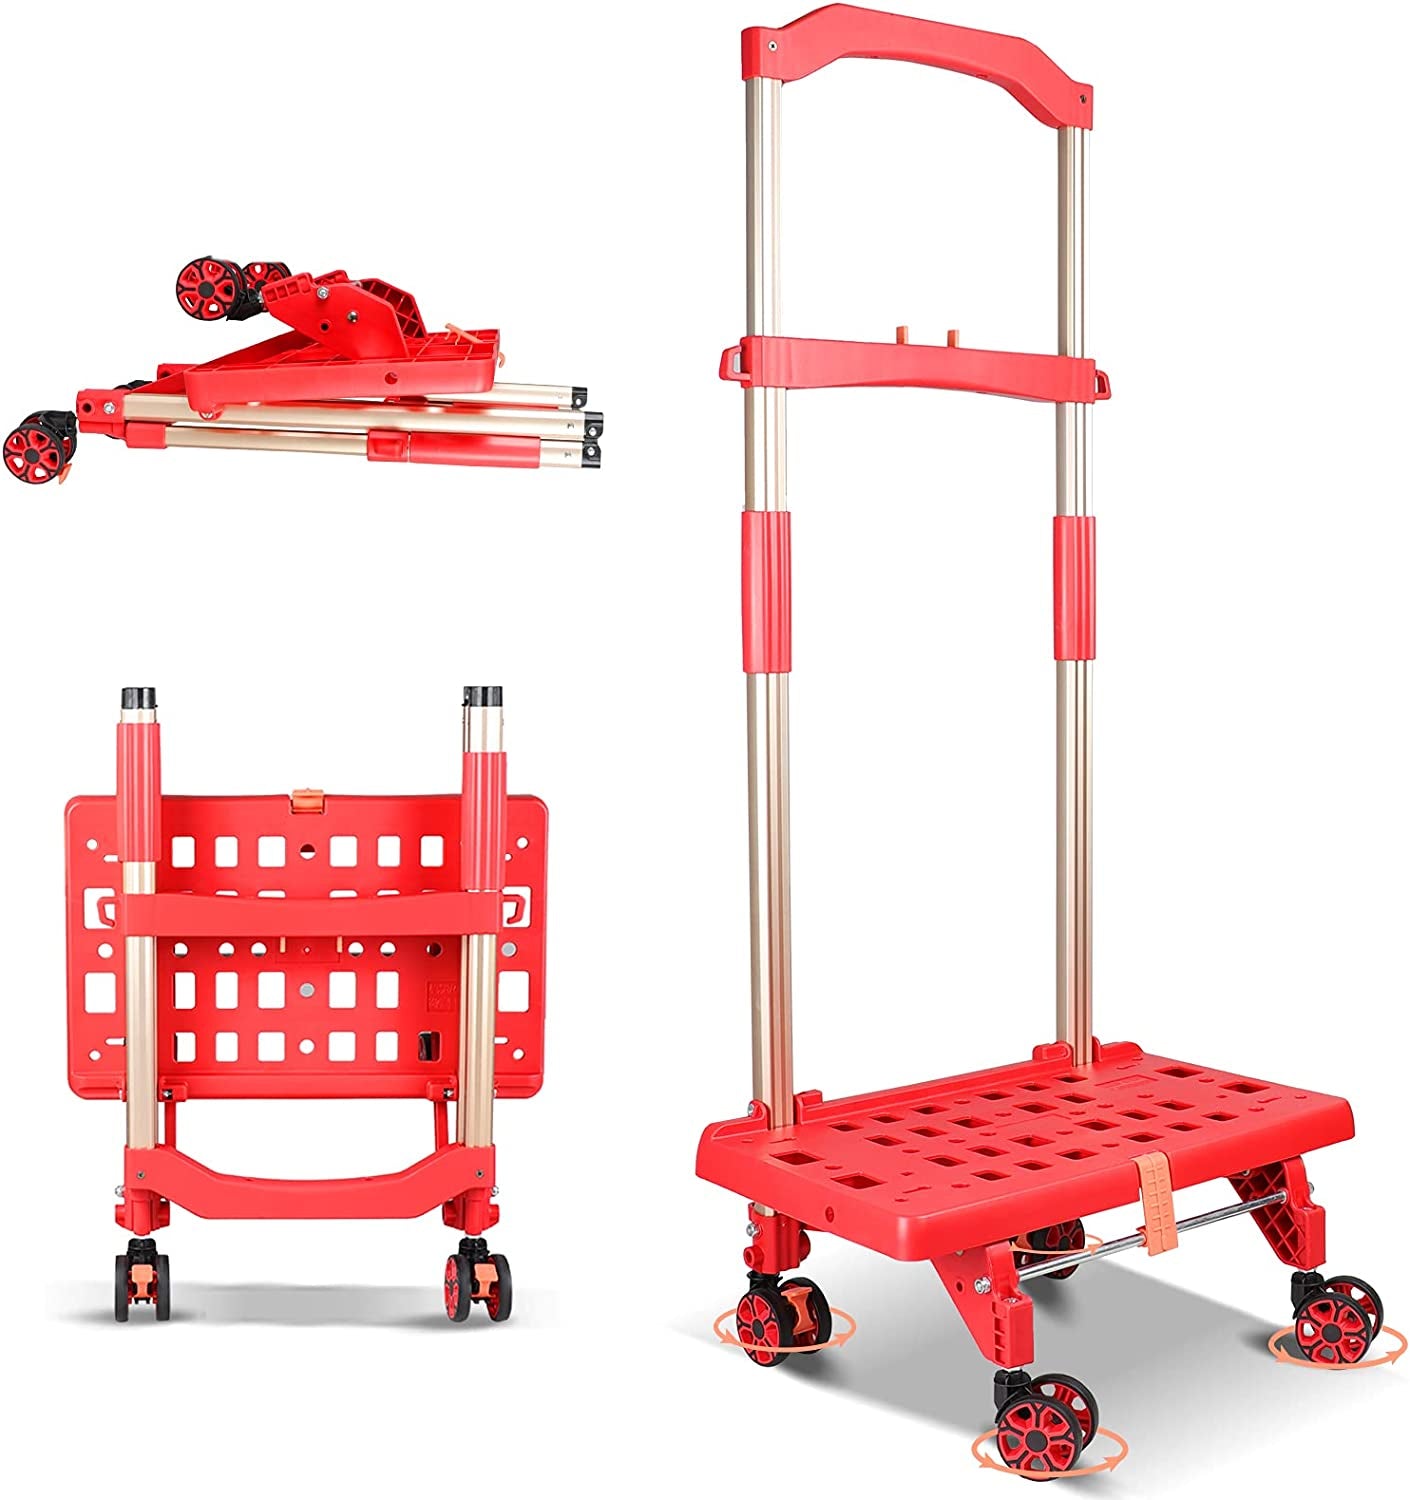 FELICON, Folding Hand Truck Portable Dolly Utility Cart Rolling Crate with 4 Rotate Double Wheels 80Kg/176Lbs Heavy Duty Adjustable Handle for Moving Shopping Grocery Travel Office Use(Red Swivel Wheel)